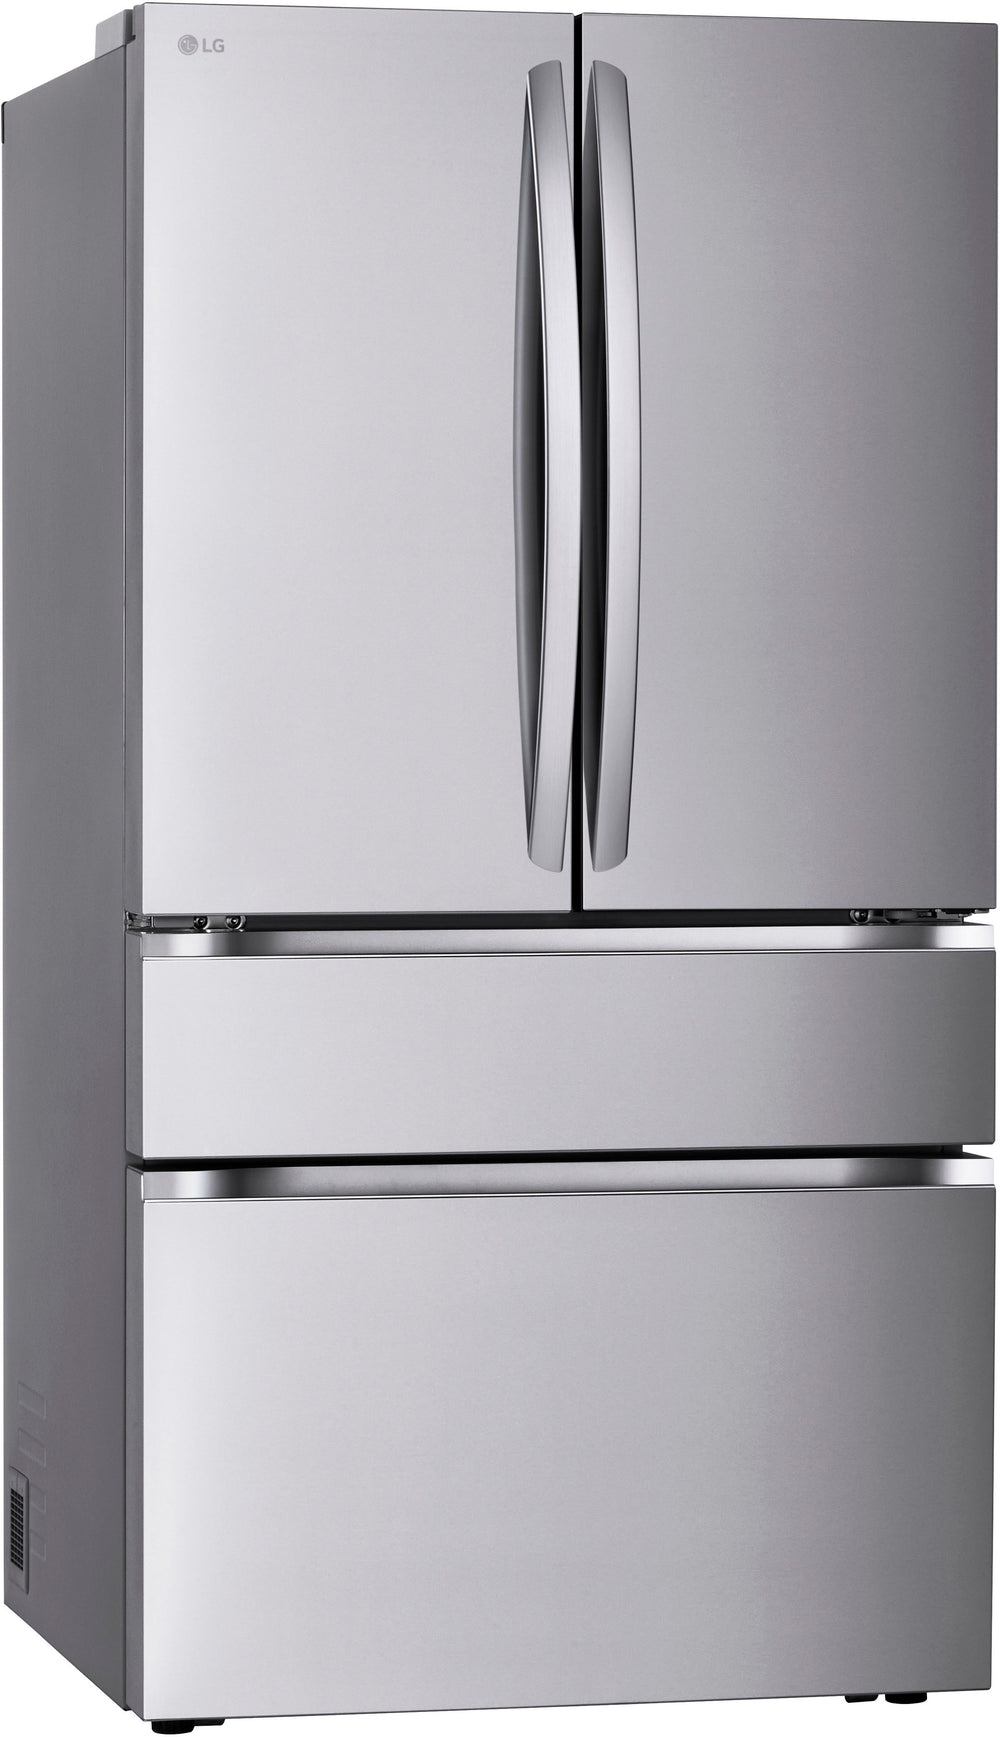 LG - 29.6 Cu. Ft. French Door Smart Refrigerator with Full-Convert Drawer - Stainless Steel_1